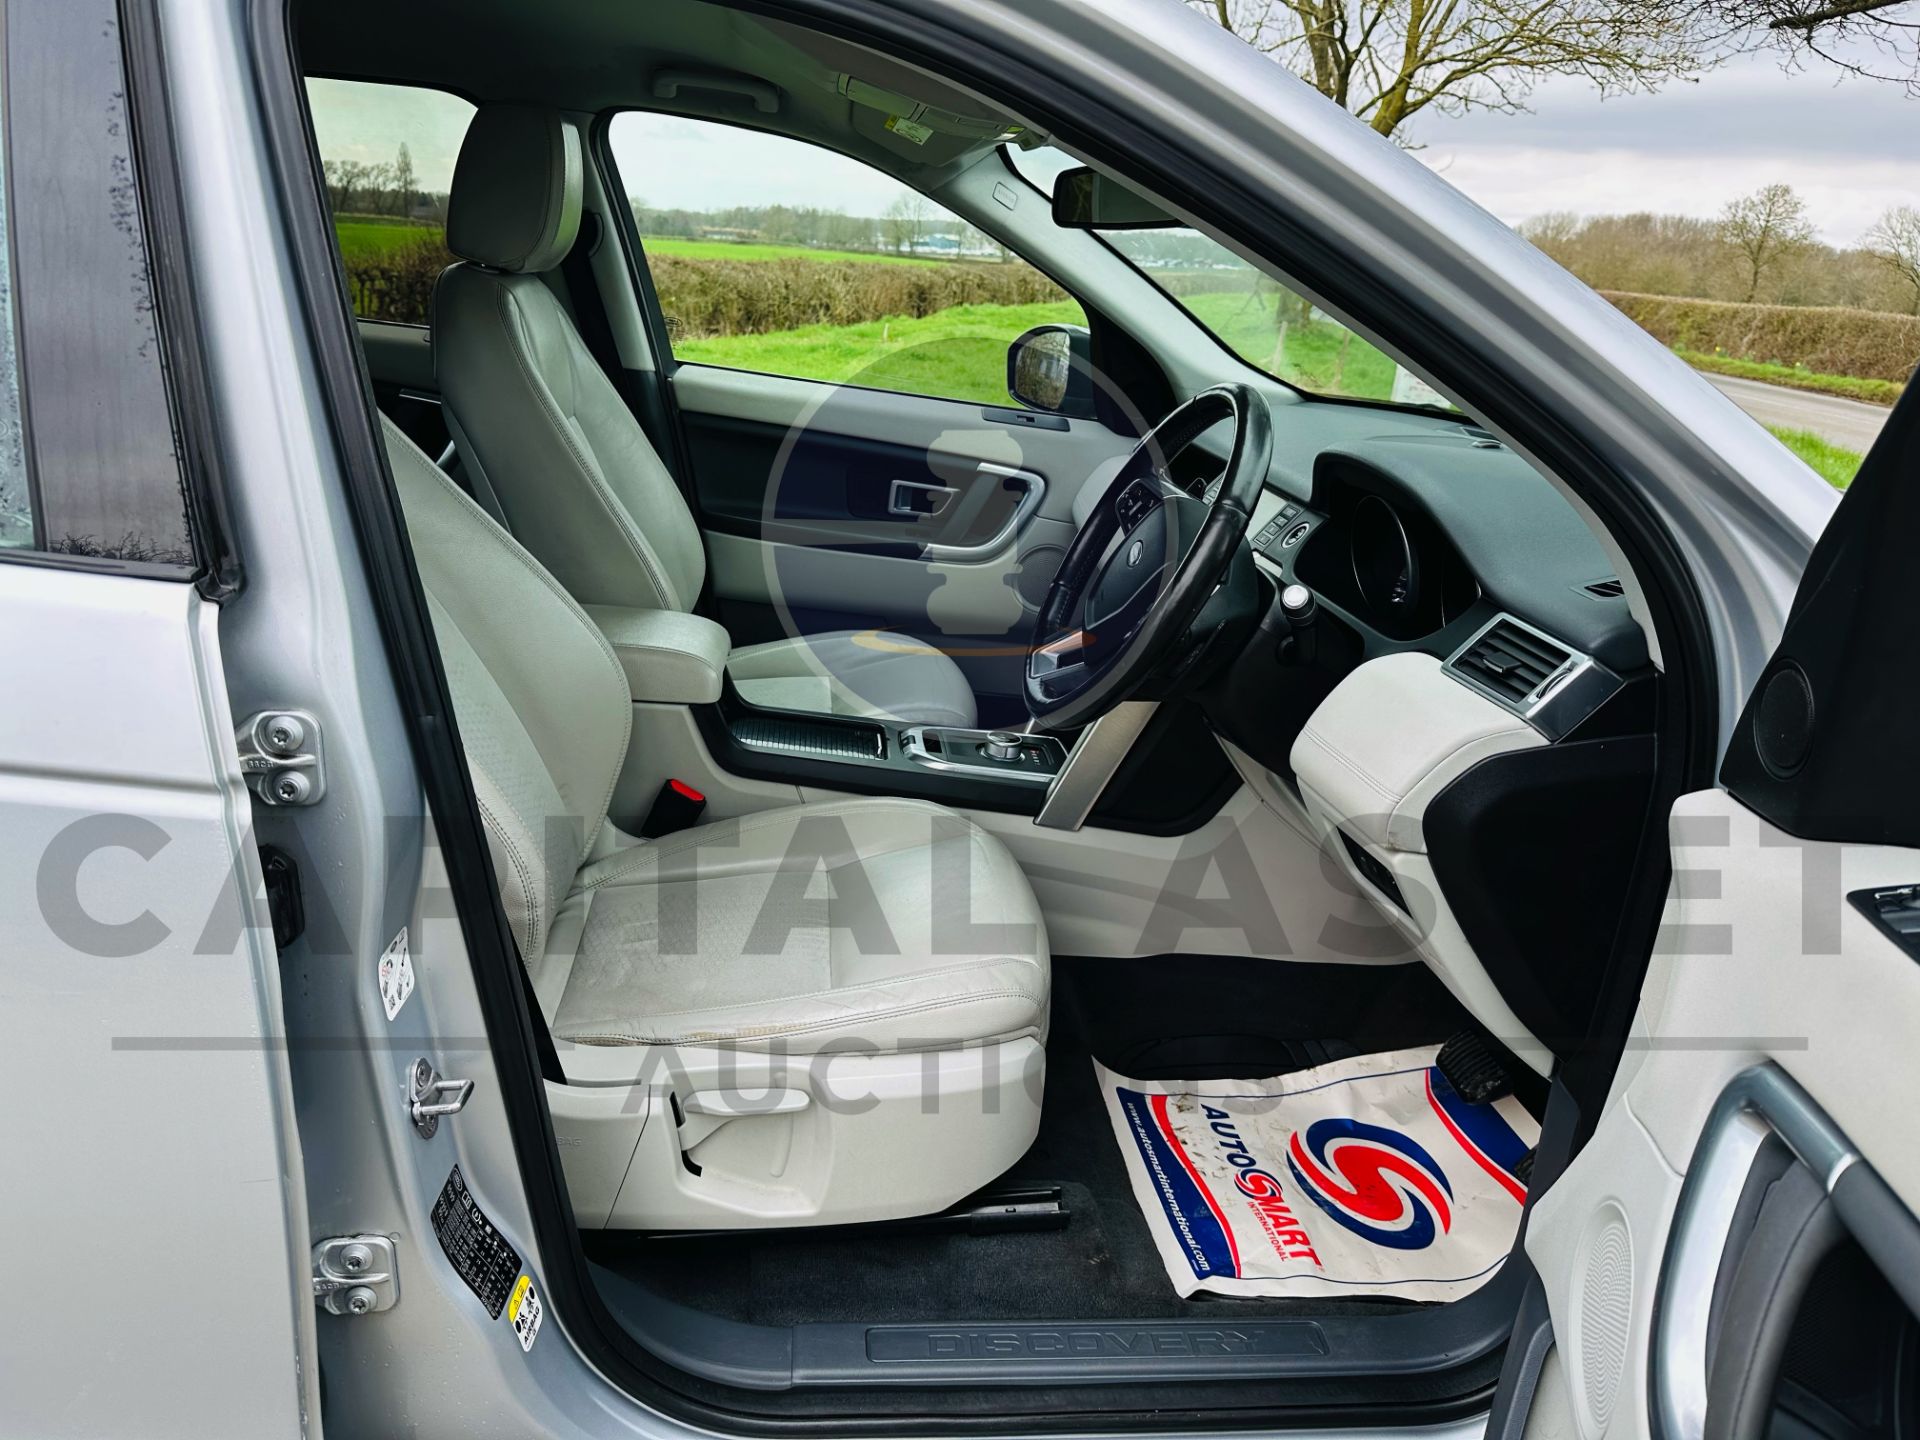 LAND ROVER DISCOVERY SPORT *SE TECH* 7 SEATER SUV (65 REG - EURO 6) 2.0 TD4 - AUTOMATIC - Image 25 of 38